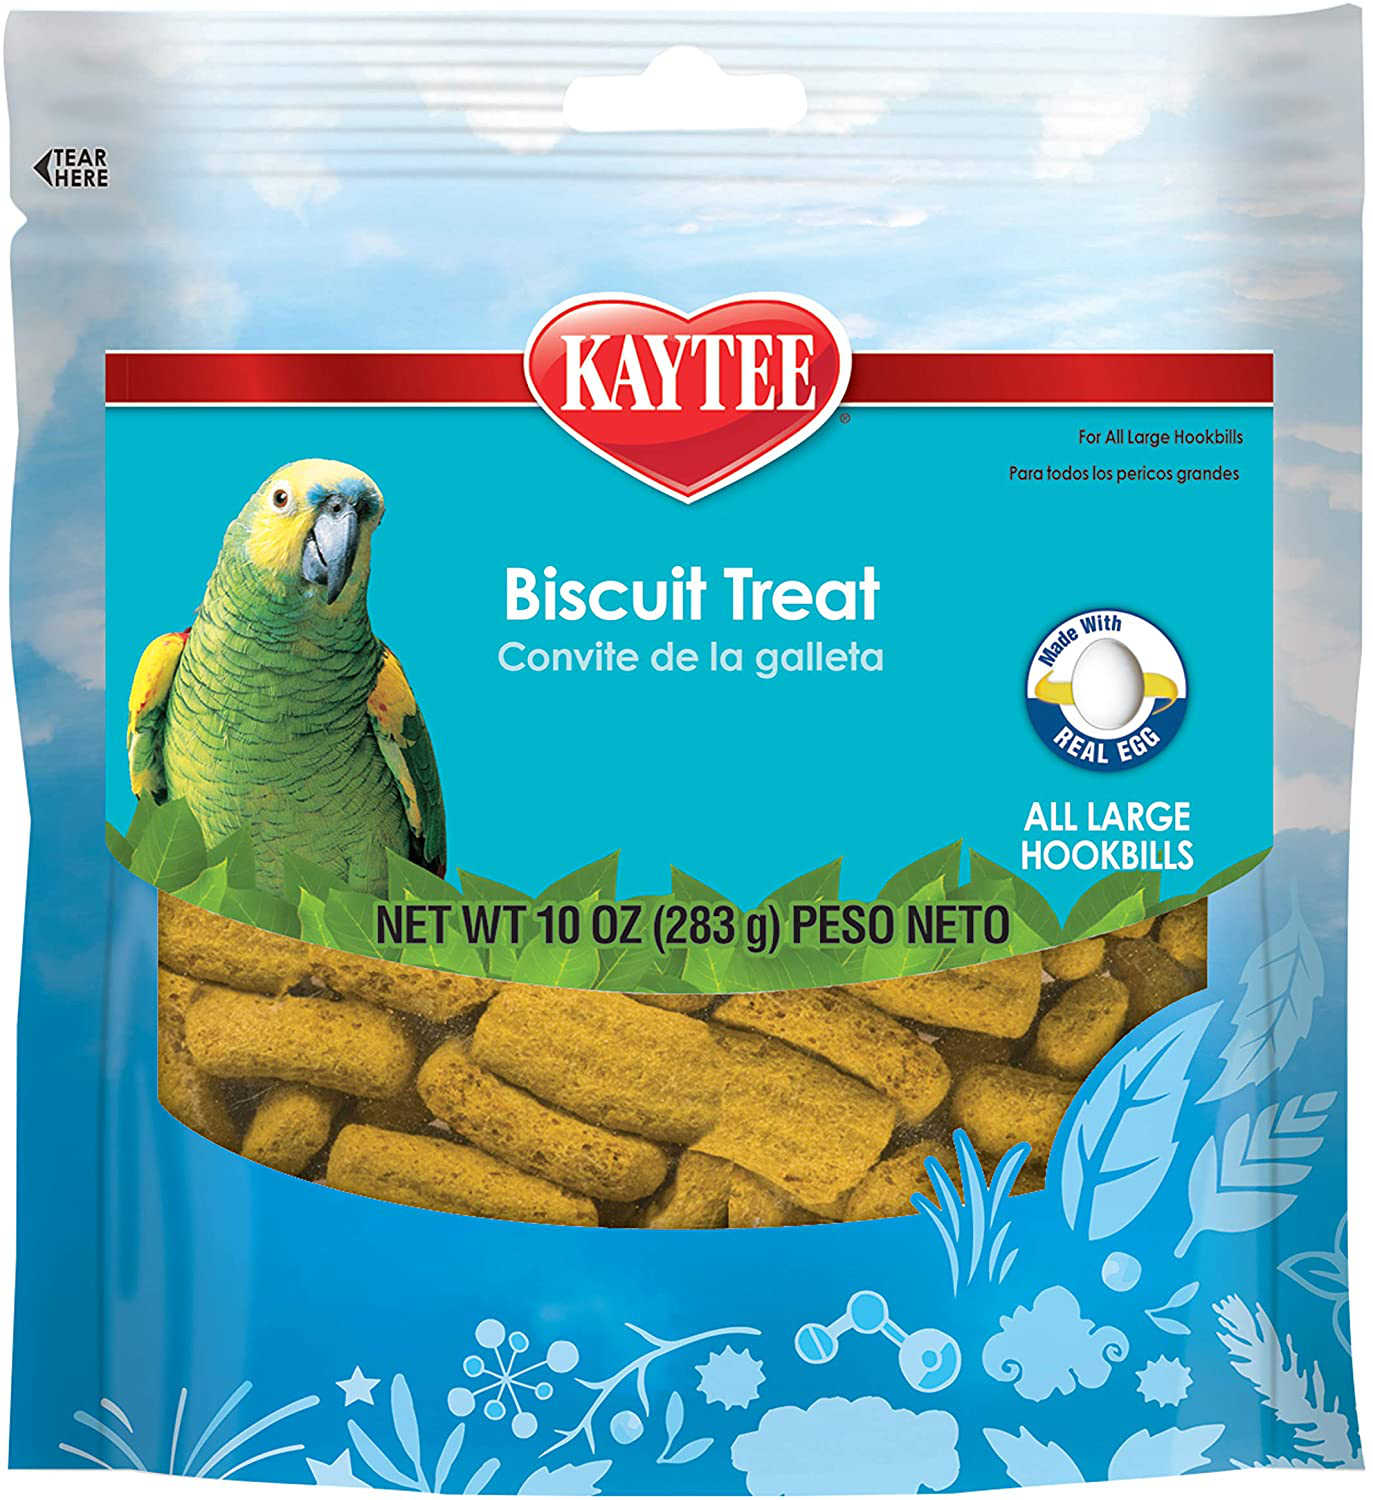 Kaytee Biscuit Treat for Parrots, 10-Ounce